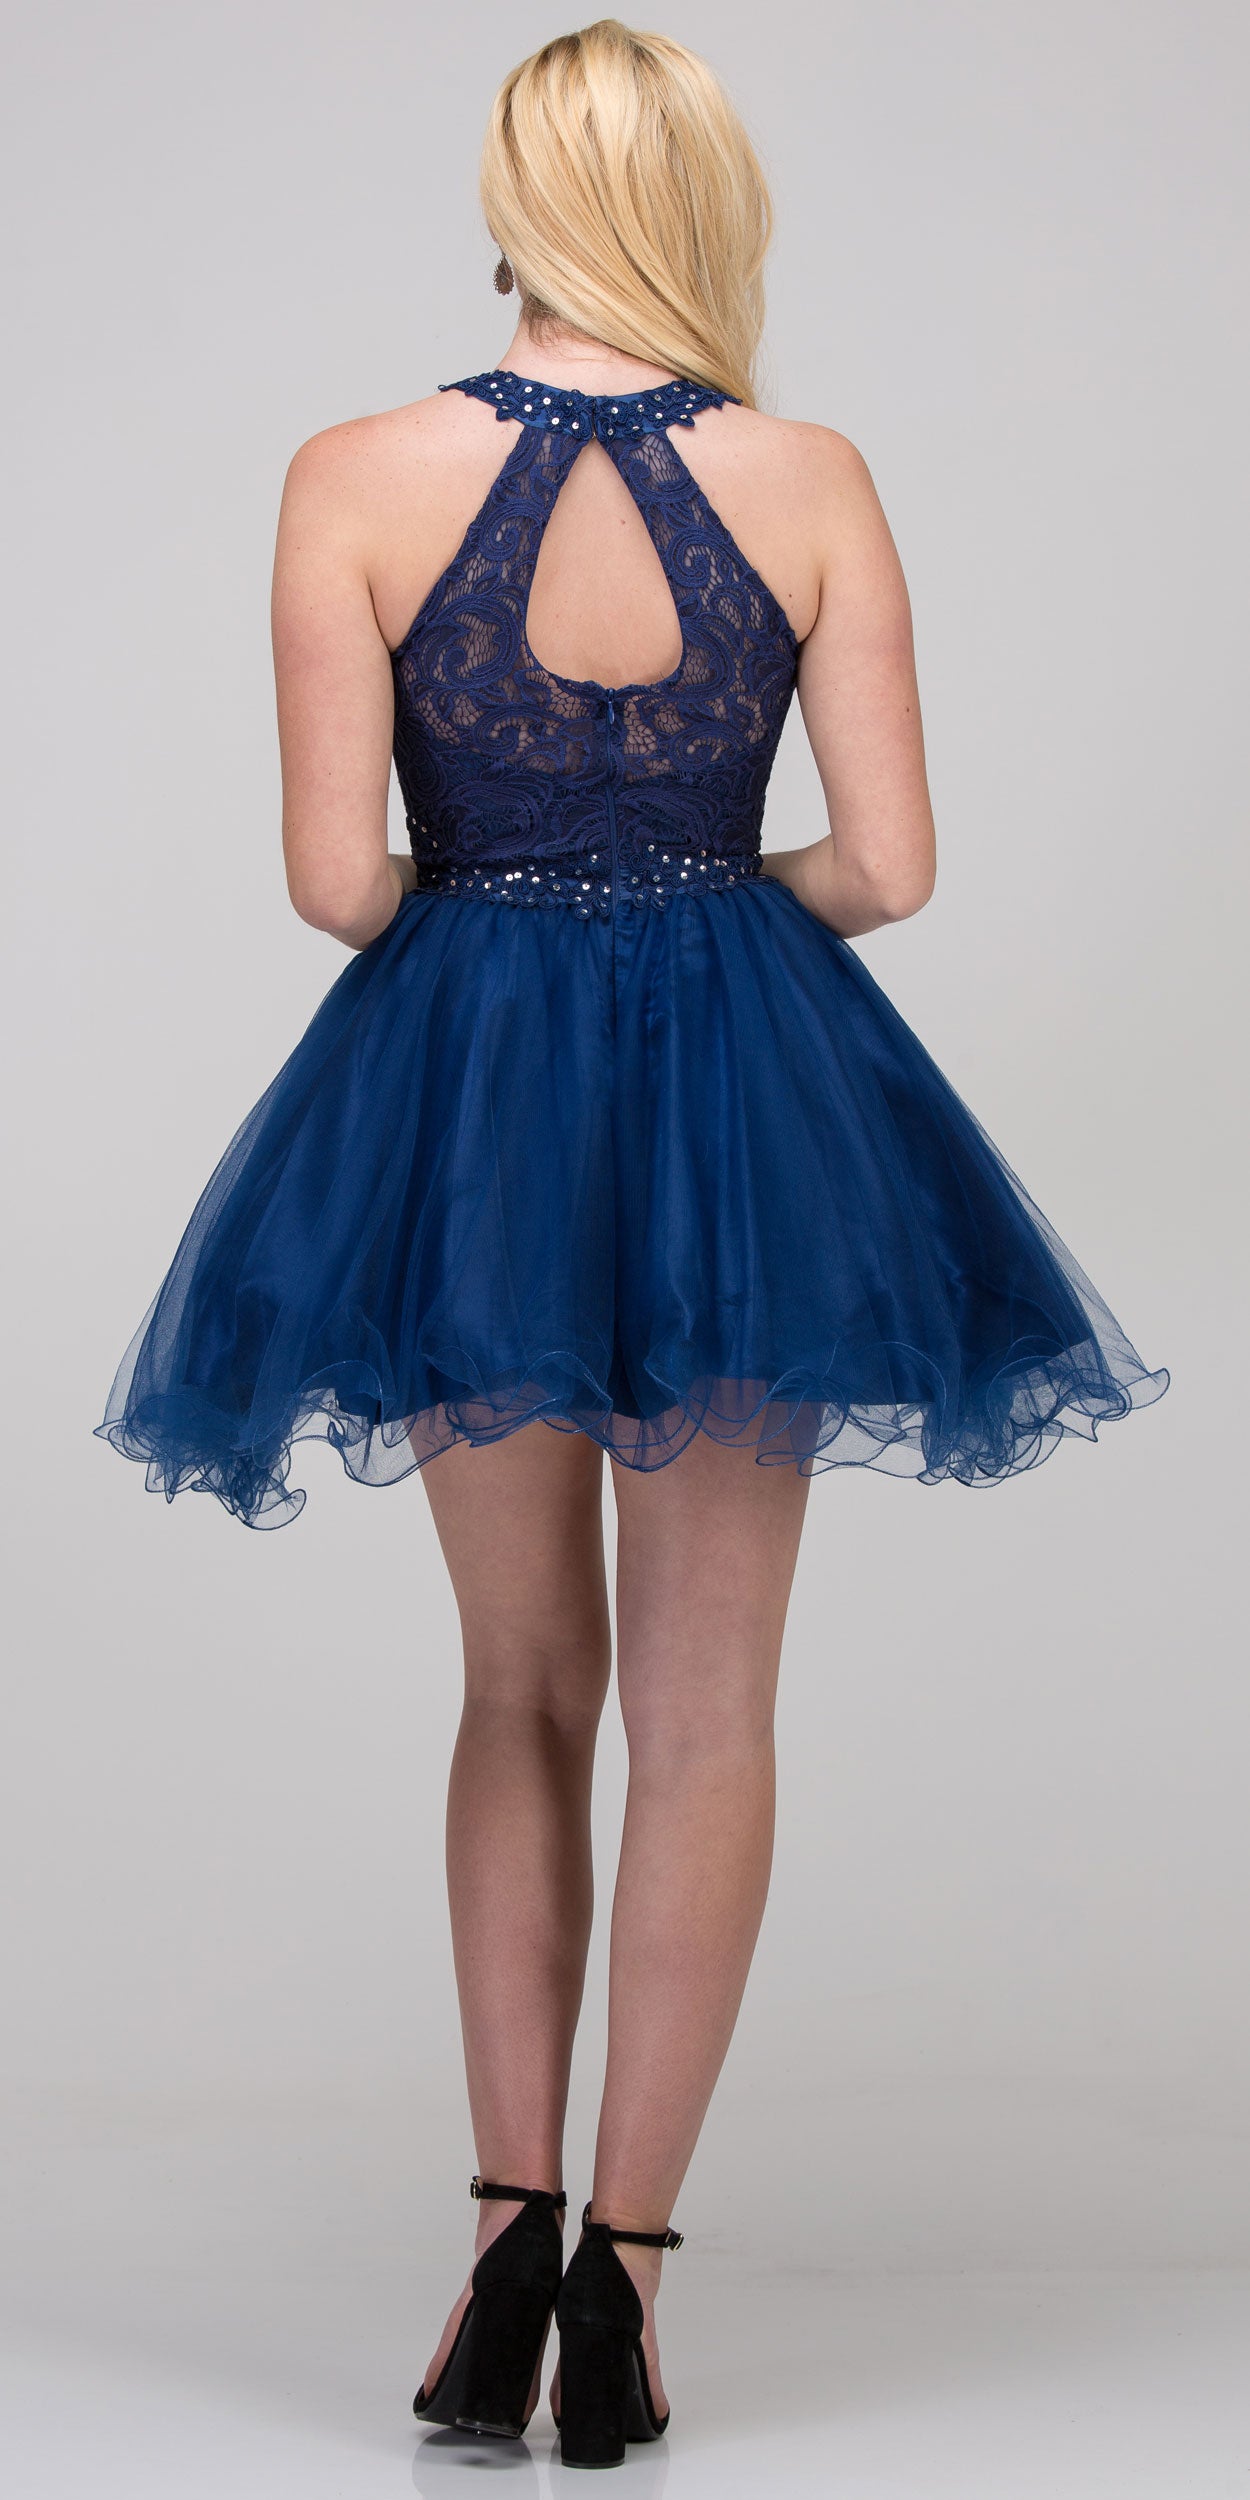 Image of Lace High Neck Top Sheer Waist Babydoll Homecoming Dress in Navy